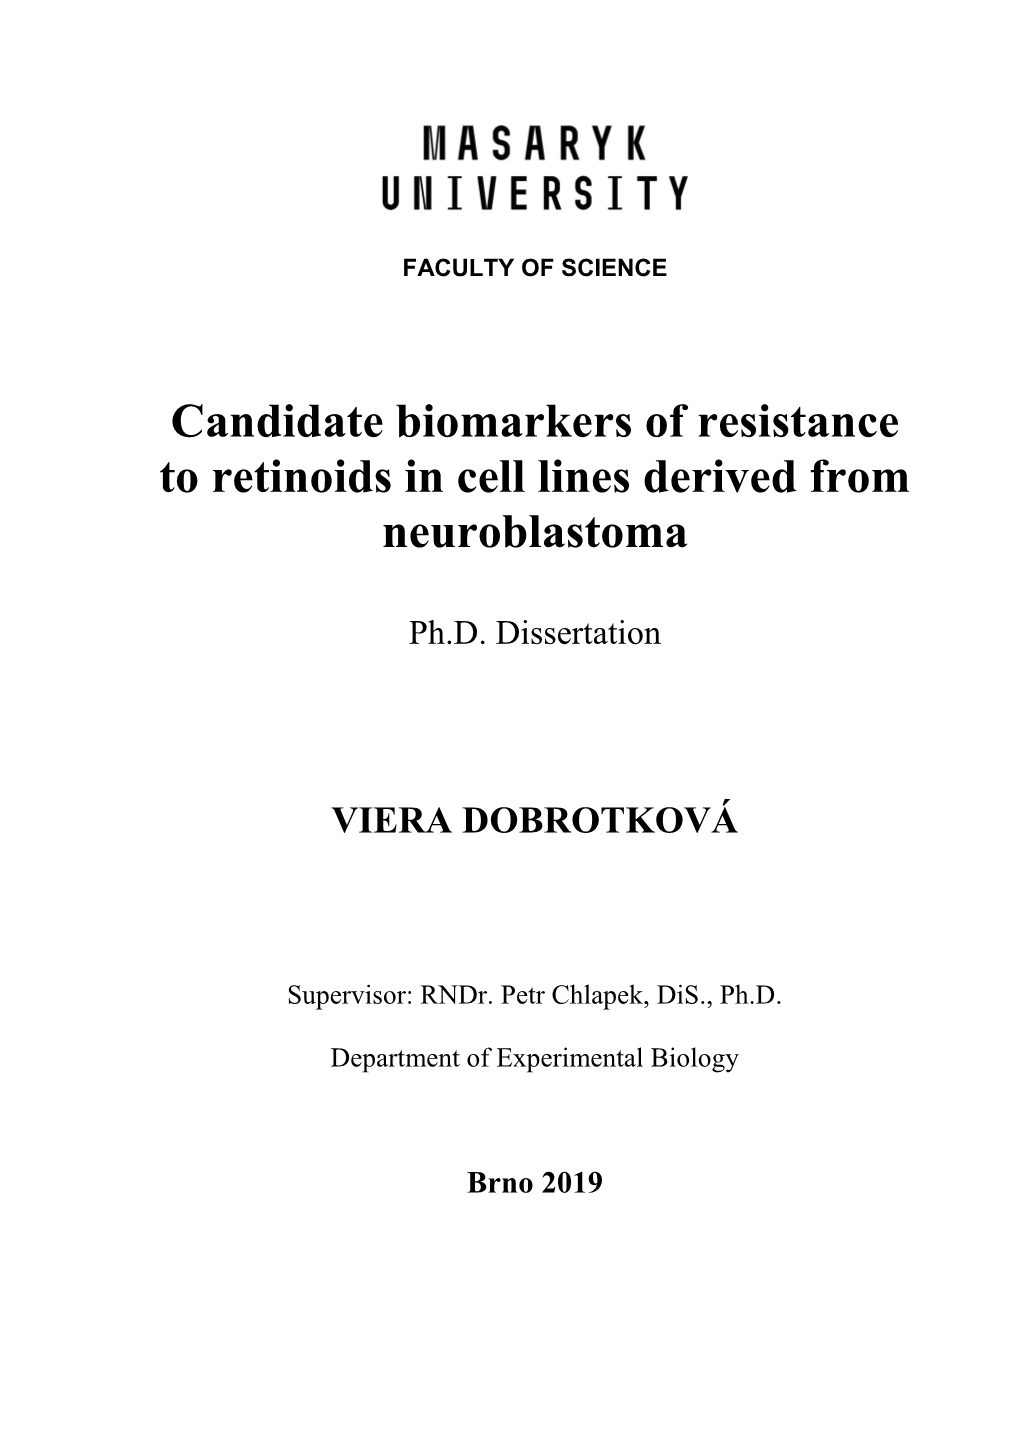 Candidate Biomarkers of Resistance to Retinoids in Cell Lines Derived from Neuroblastoma